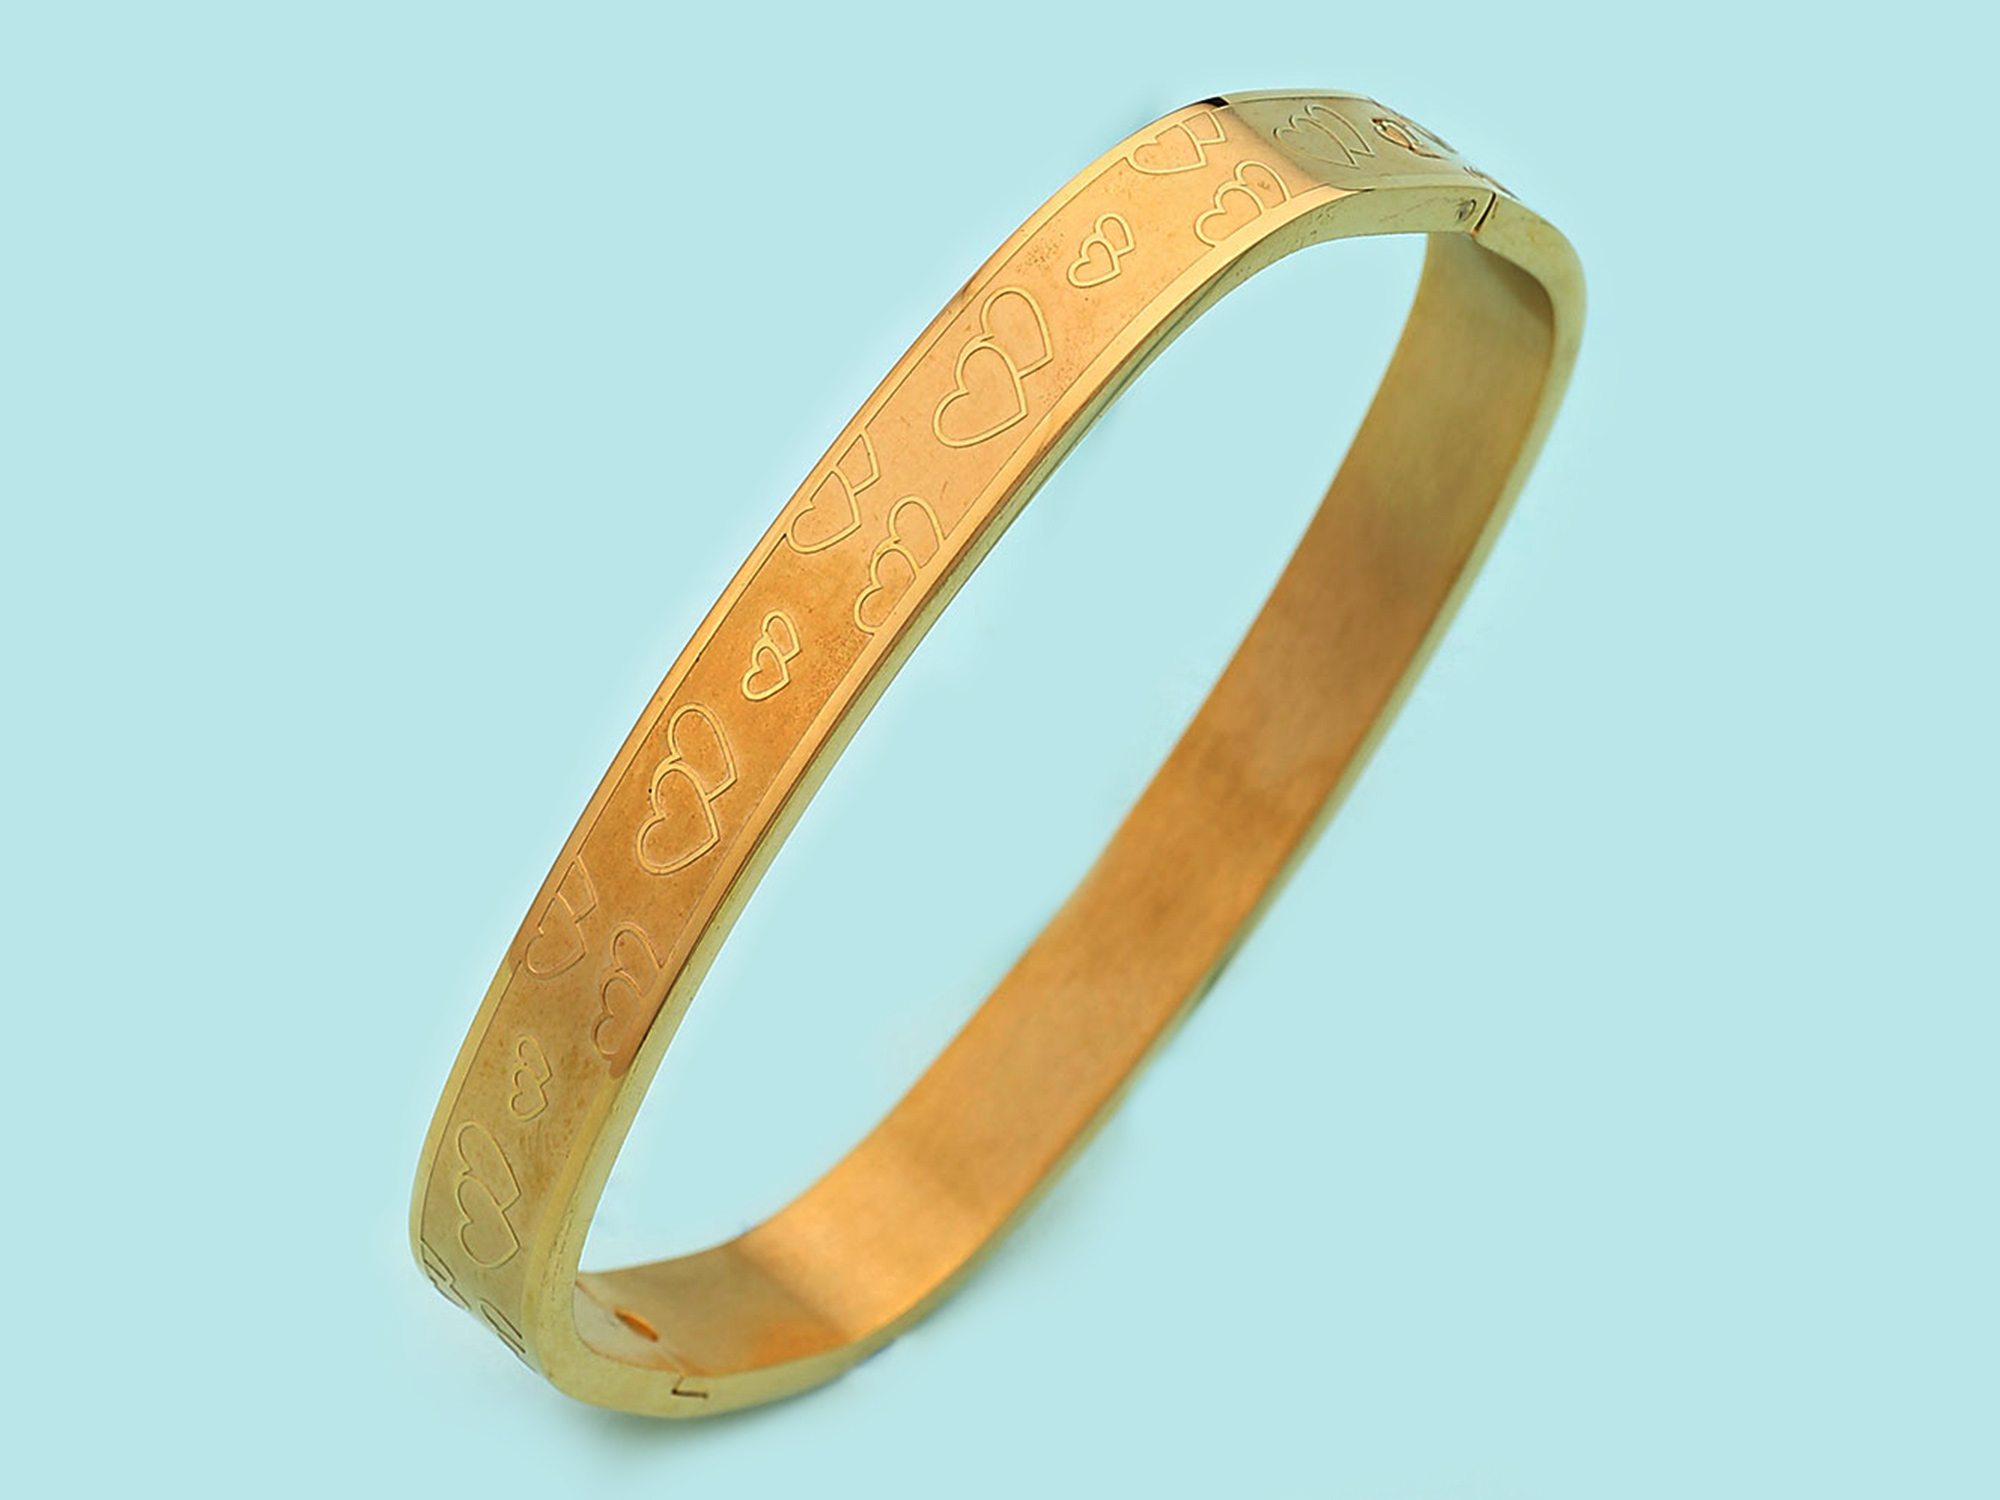 What are the planetary benefits of wearing Copper Kada?